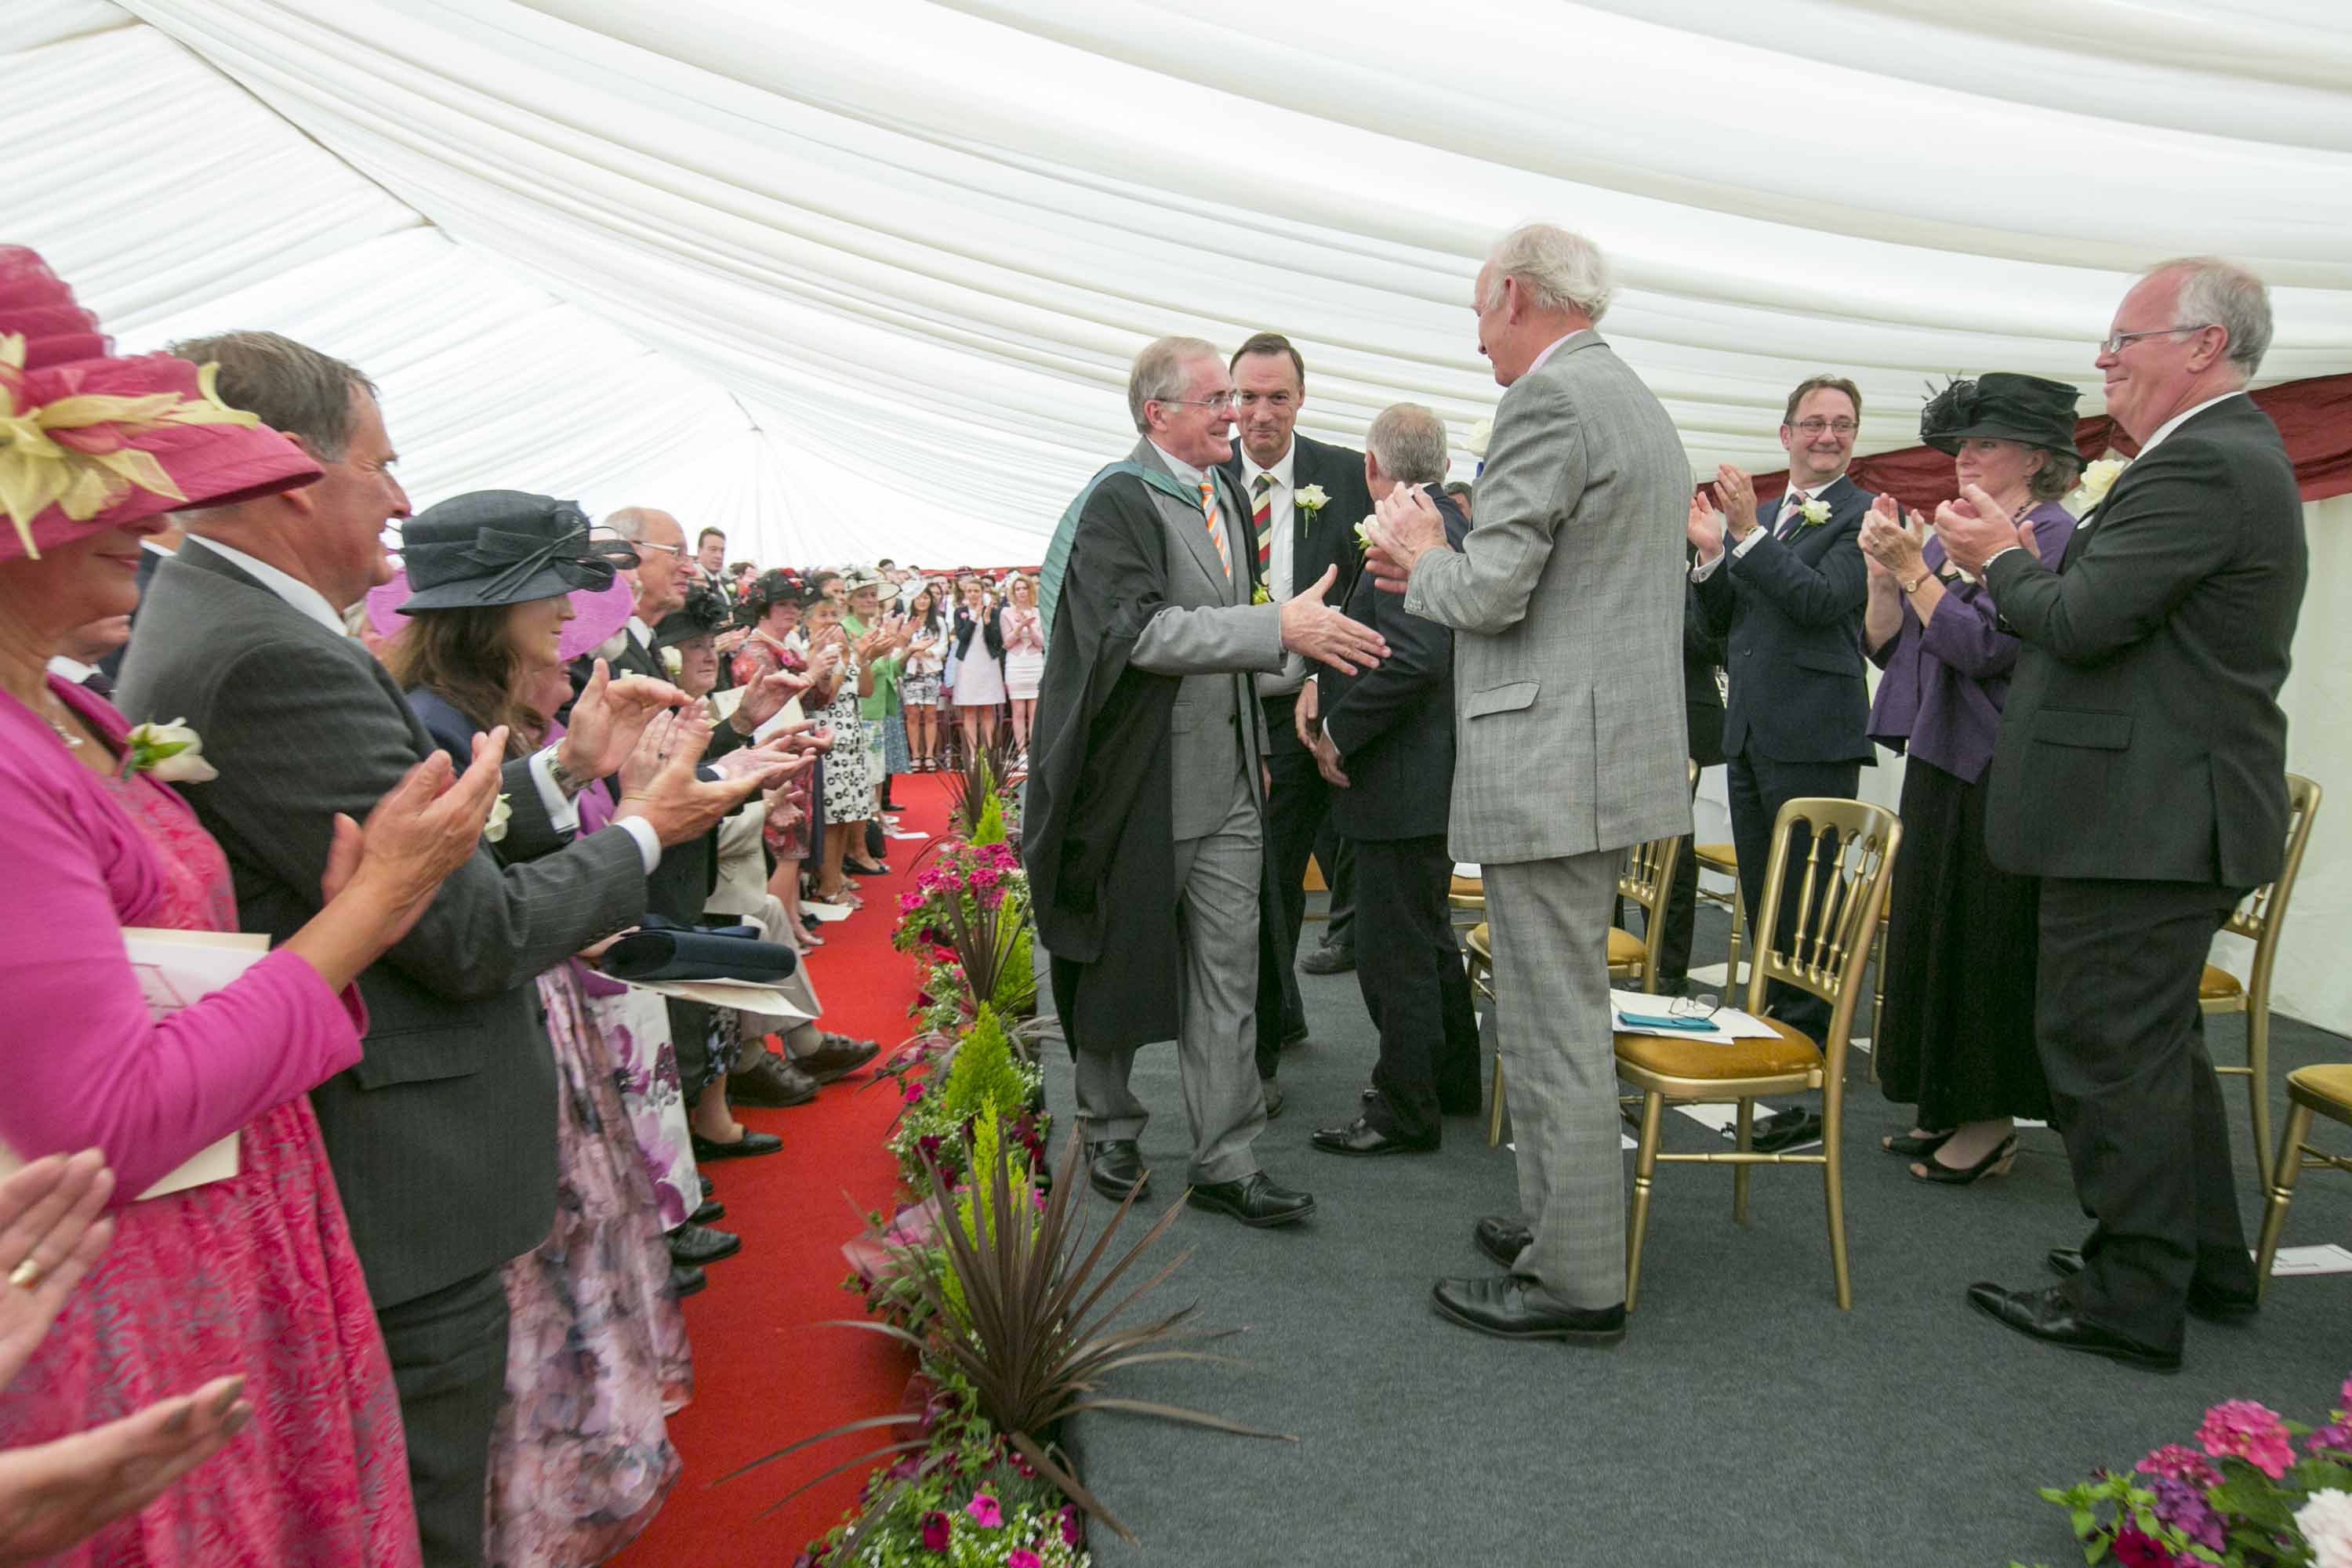 Commemoration Day 2015: Mr Bowen during prizegiving and speeches in the marquee